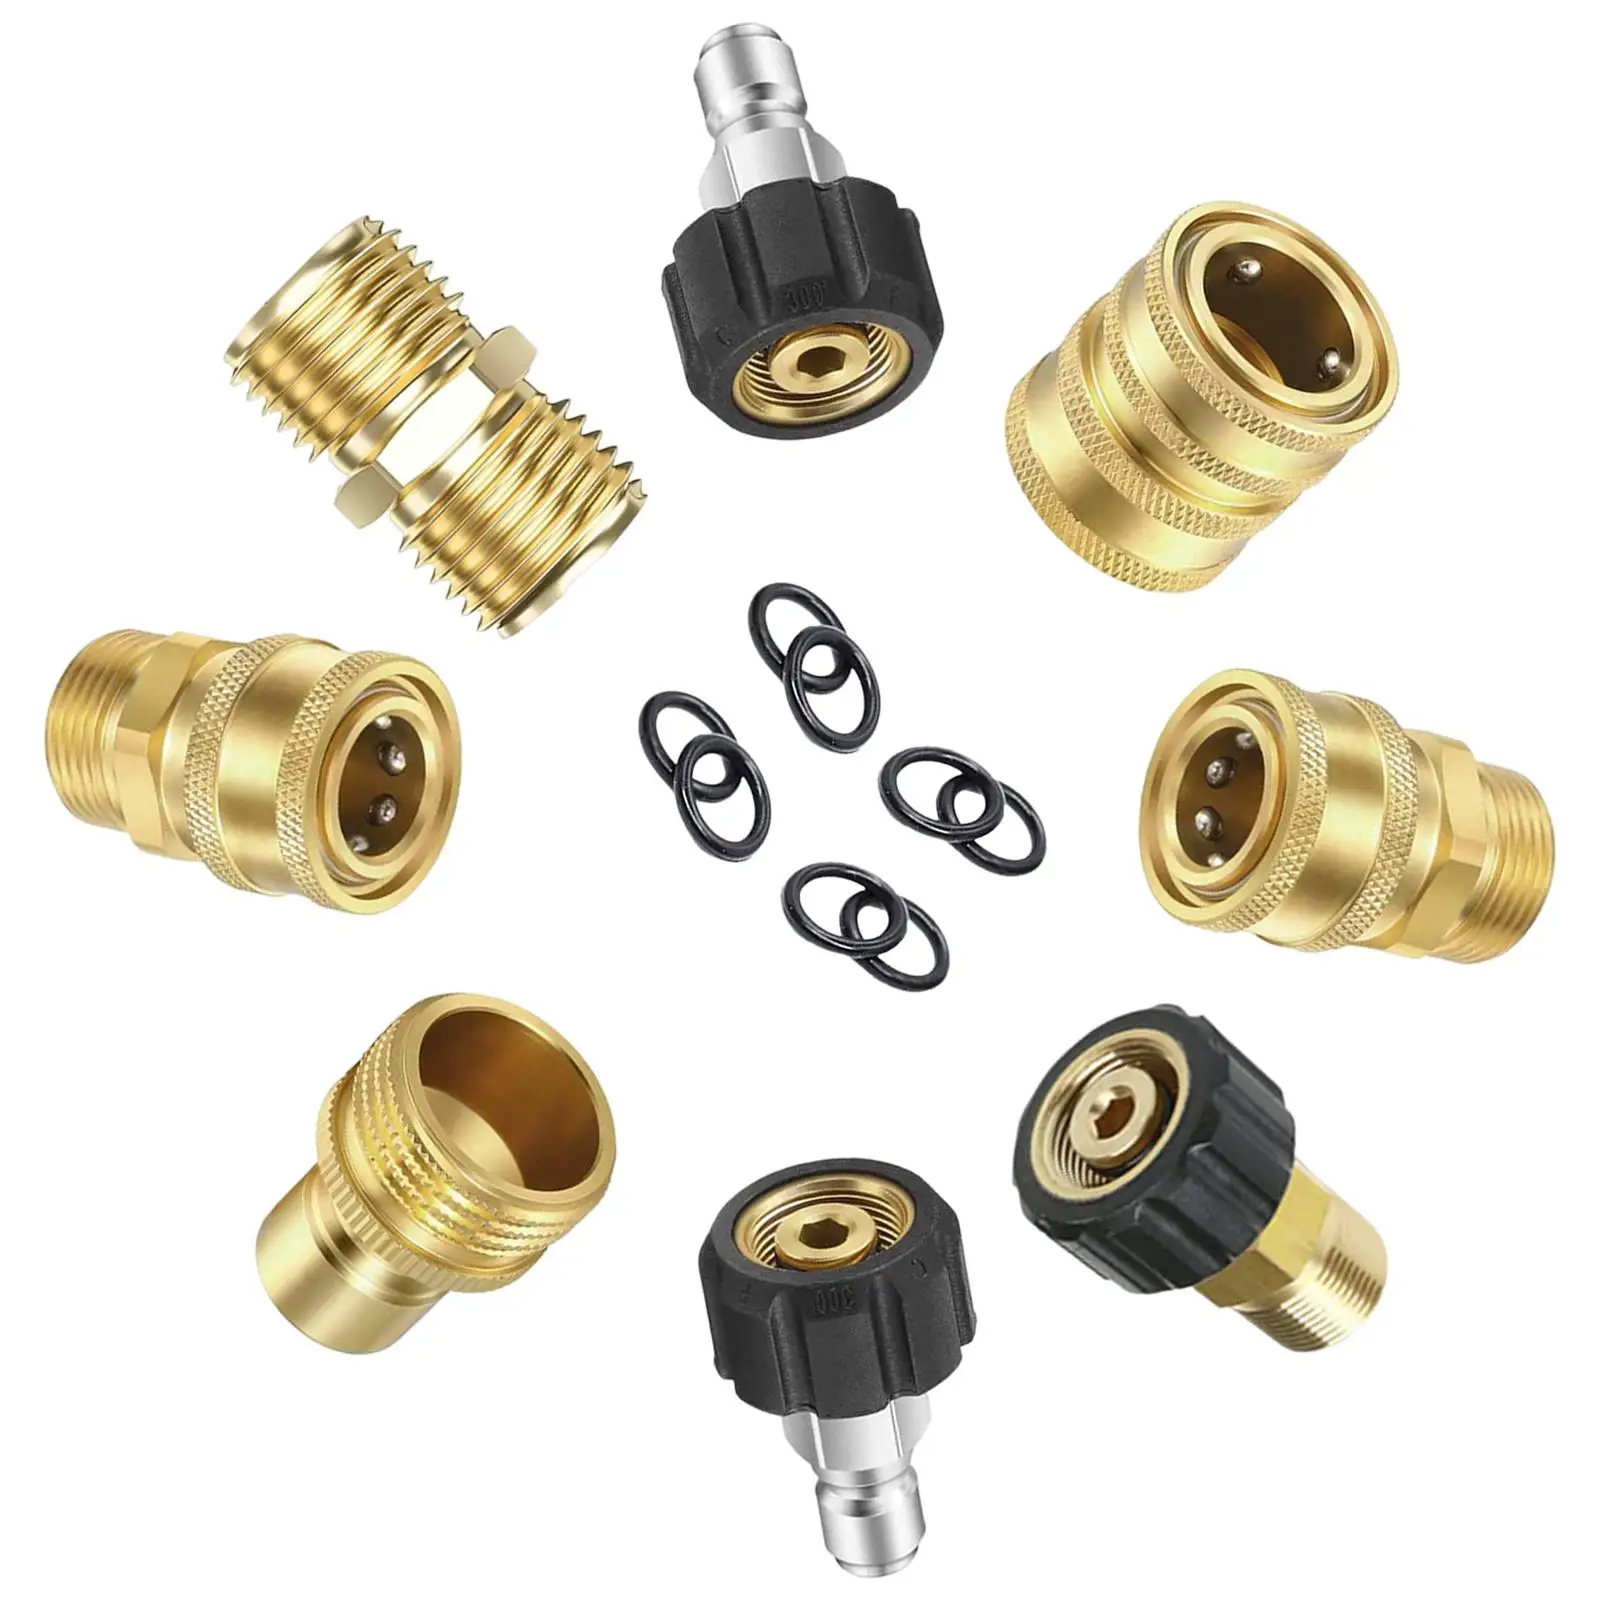 

8x High Pressure Washer Adapter M22 Swivel to 3/8'' Quick Connect Durable High Pressure Washers Replaces Garden Hose Fittings